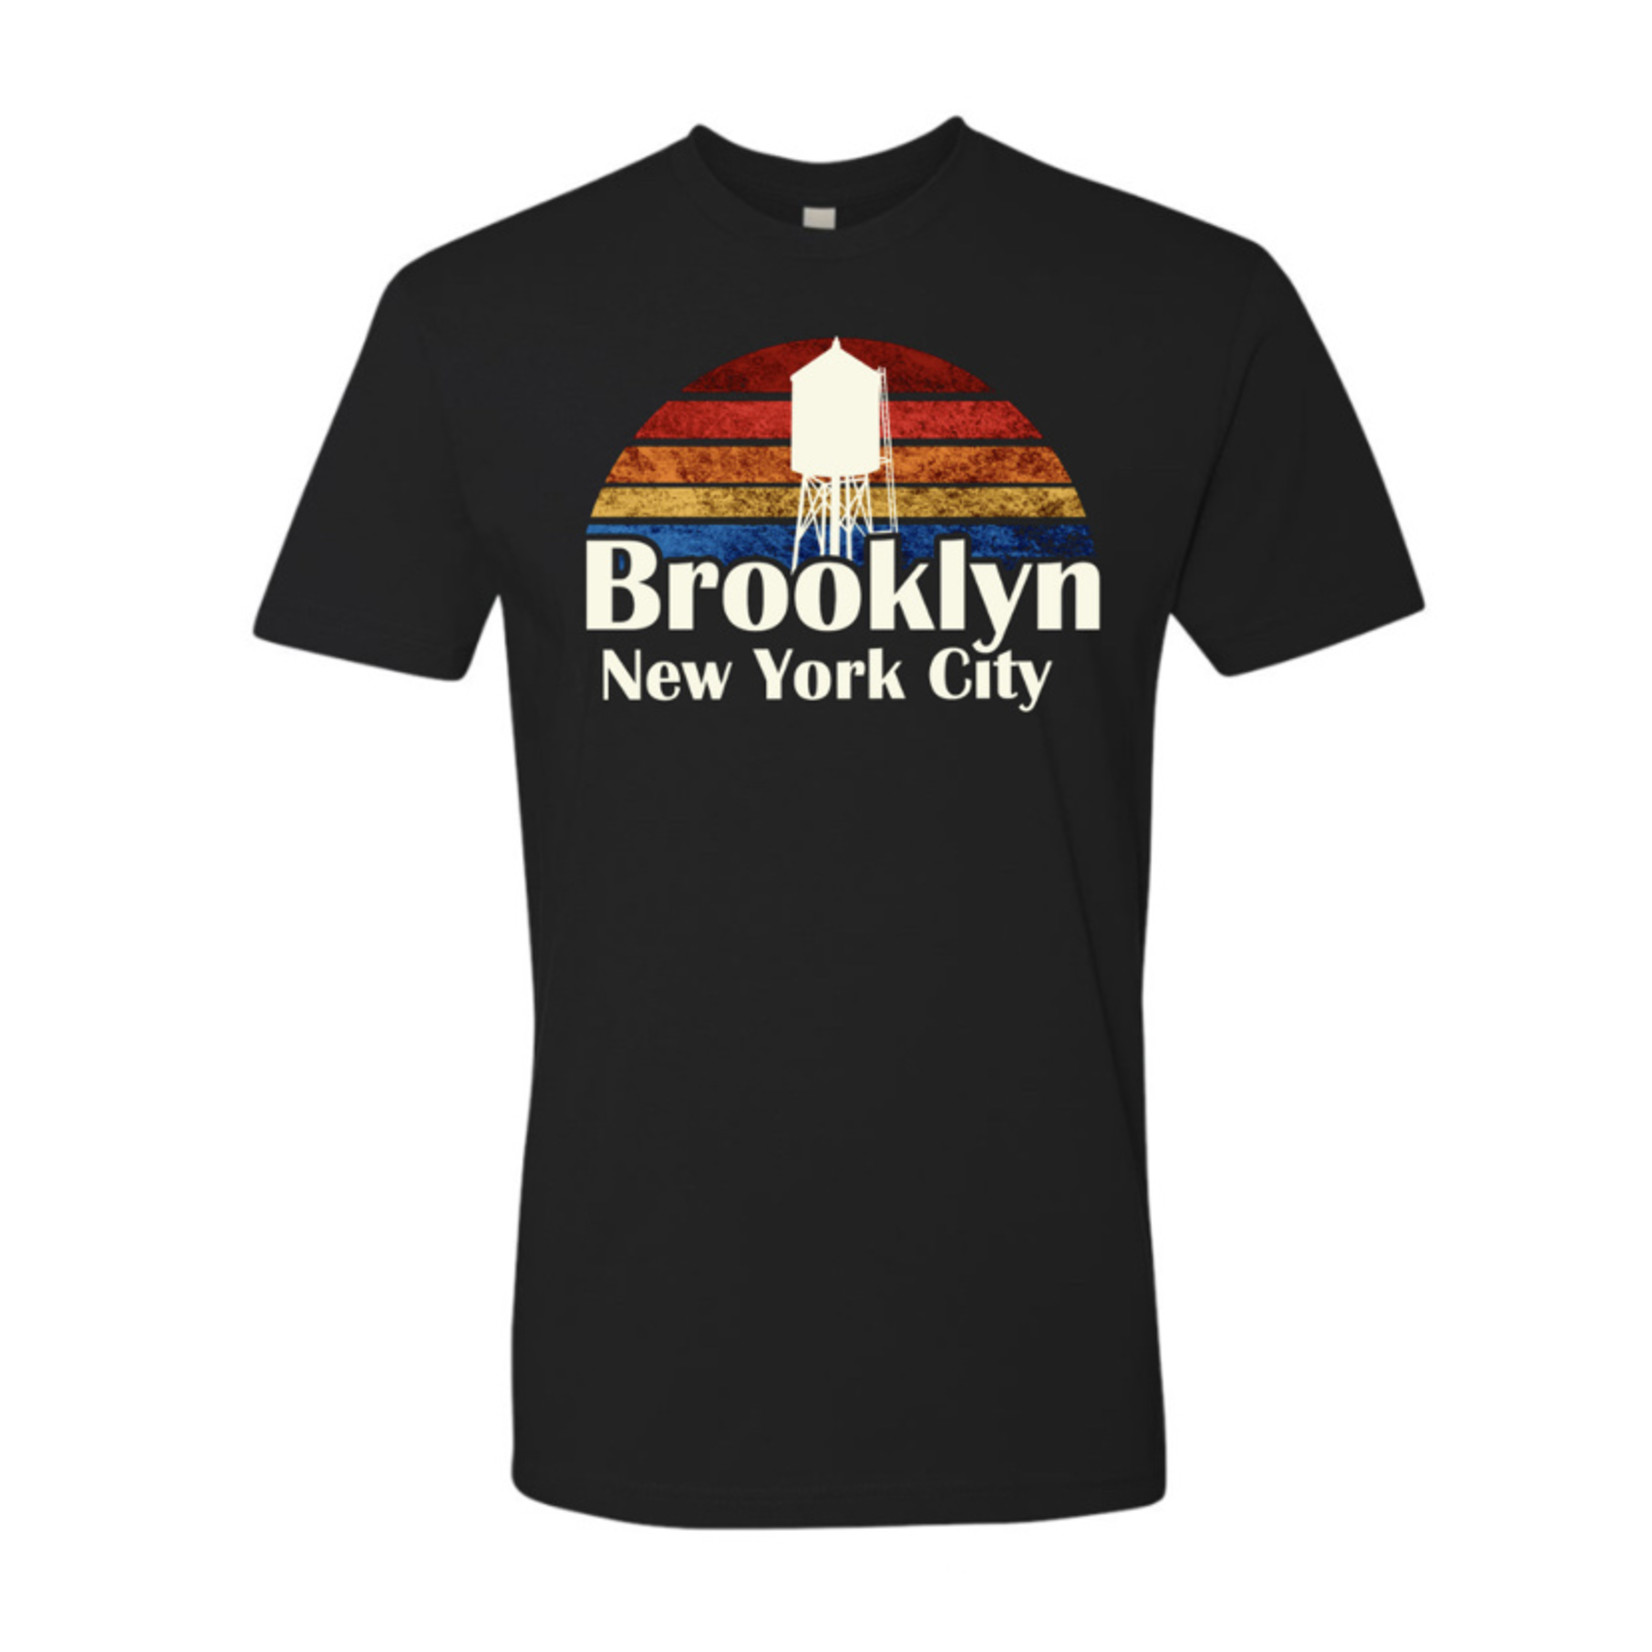 Brooklyn, NYC T-Shirt in White/Black : Exit9 Exclusive - Exit9 Gift Emporium